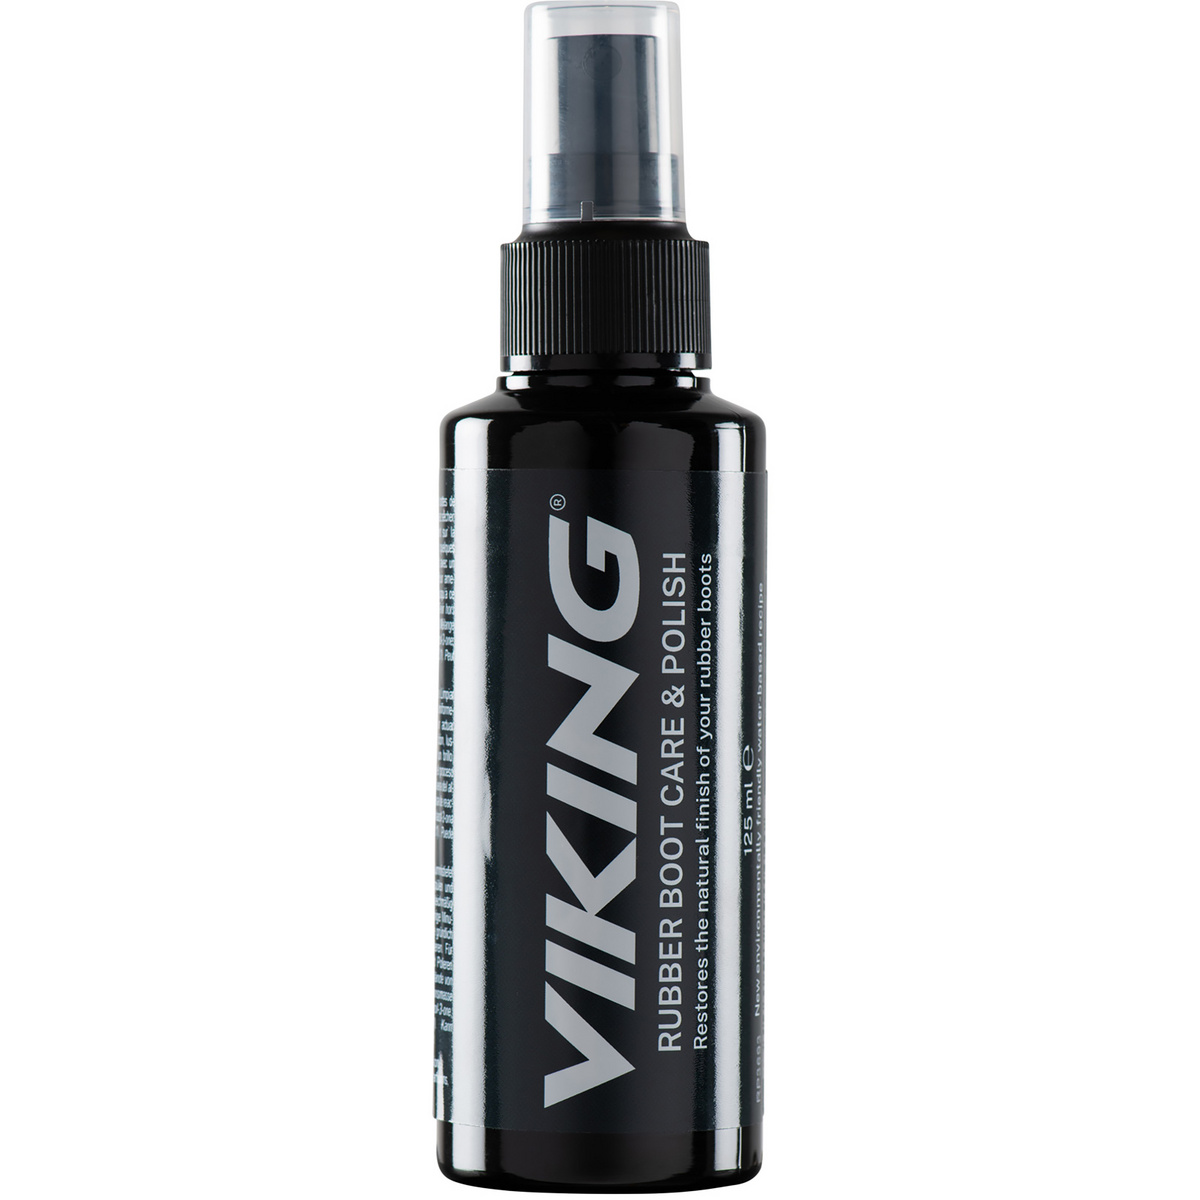 Image of Viking Spray Rubber Boot Care